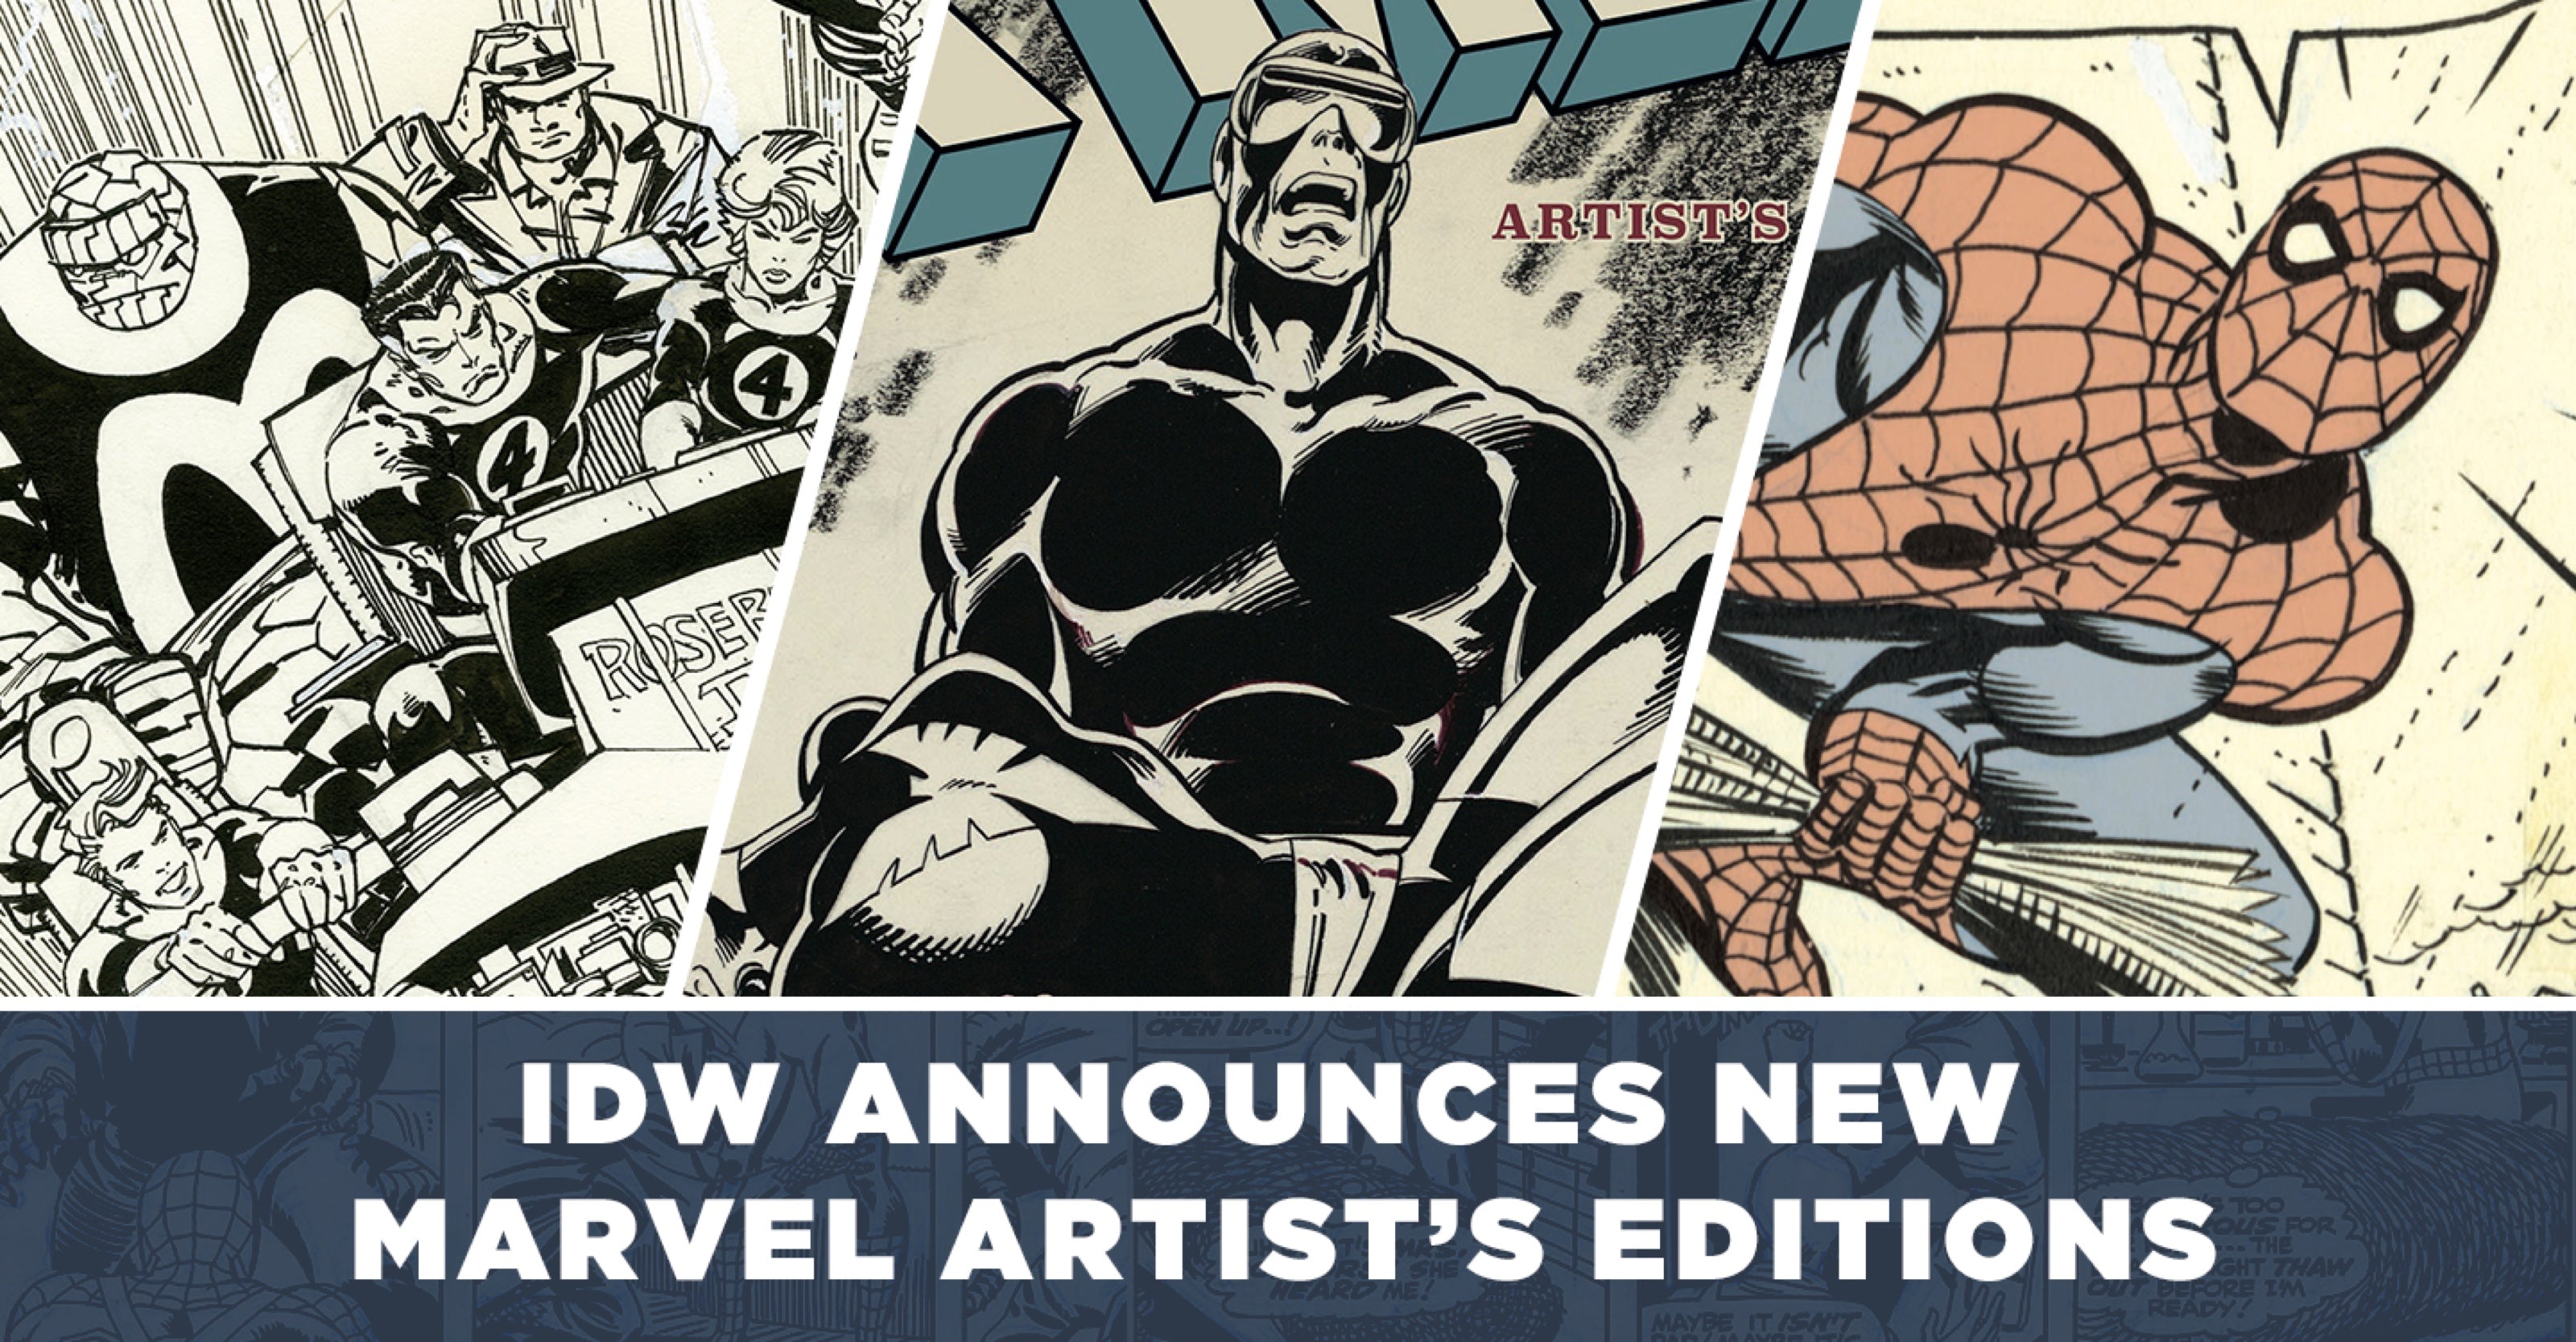 IDW’s Celebrated Artist's Editions Line Expands with New Marvel Products